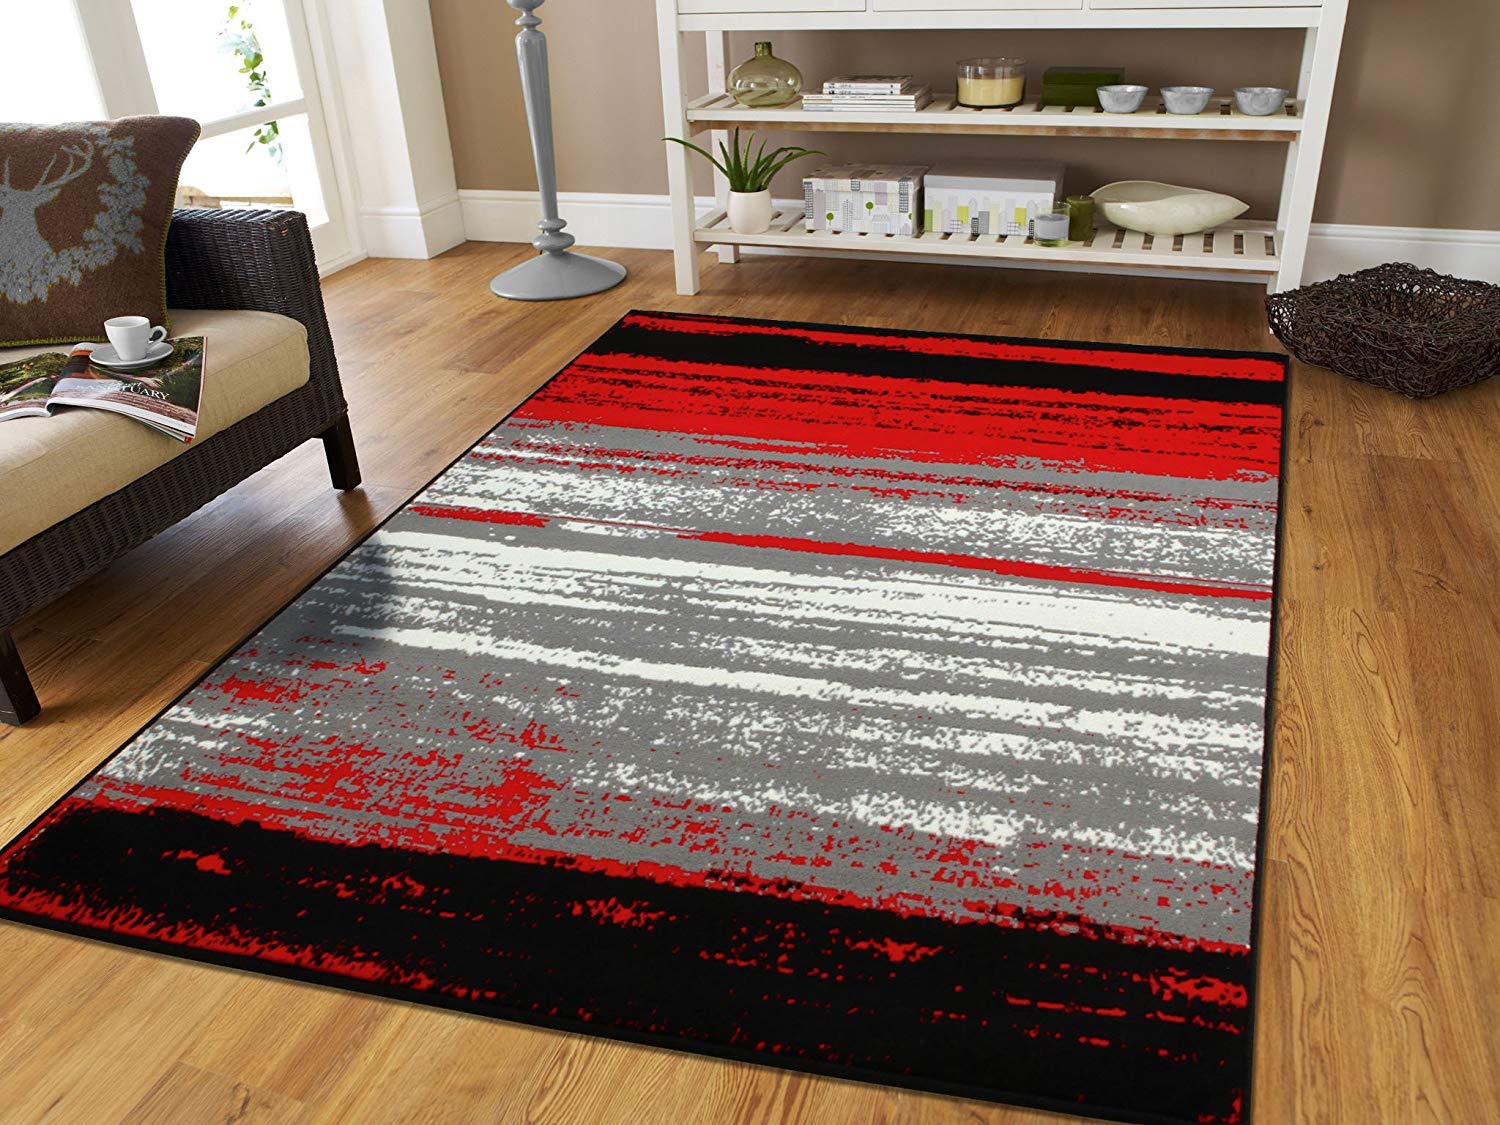 red rugs for living room amazon.com: large grey modern rugs for living room 8x10 abstract area rugs QXGIGQS